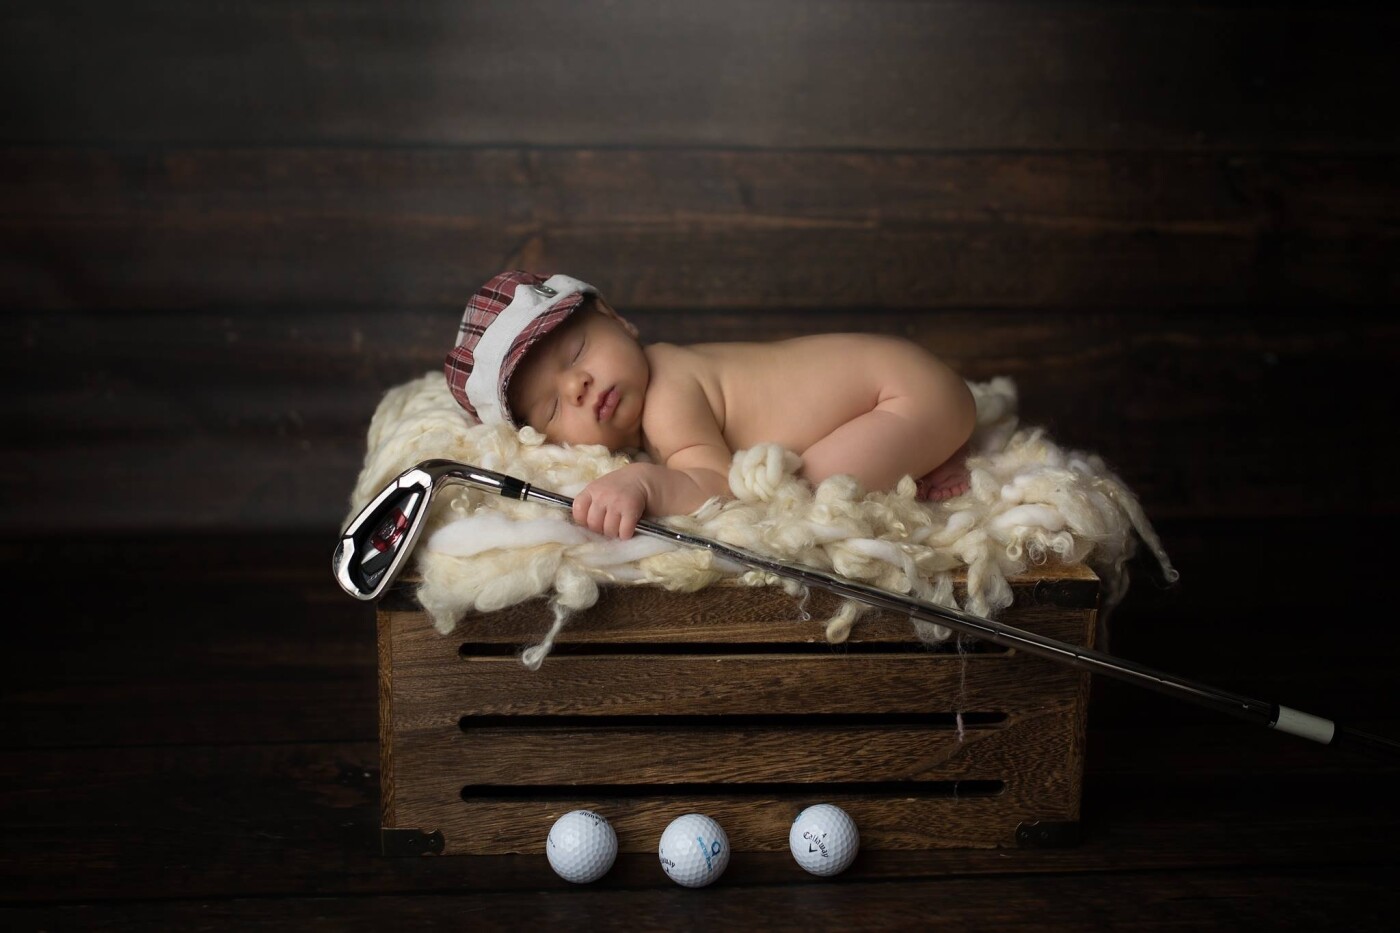 This little guy's dad is a golfer so mom requested to incorporate golf into his session.  At a few days new he already looks like a pro :)